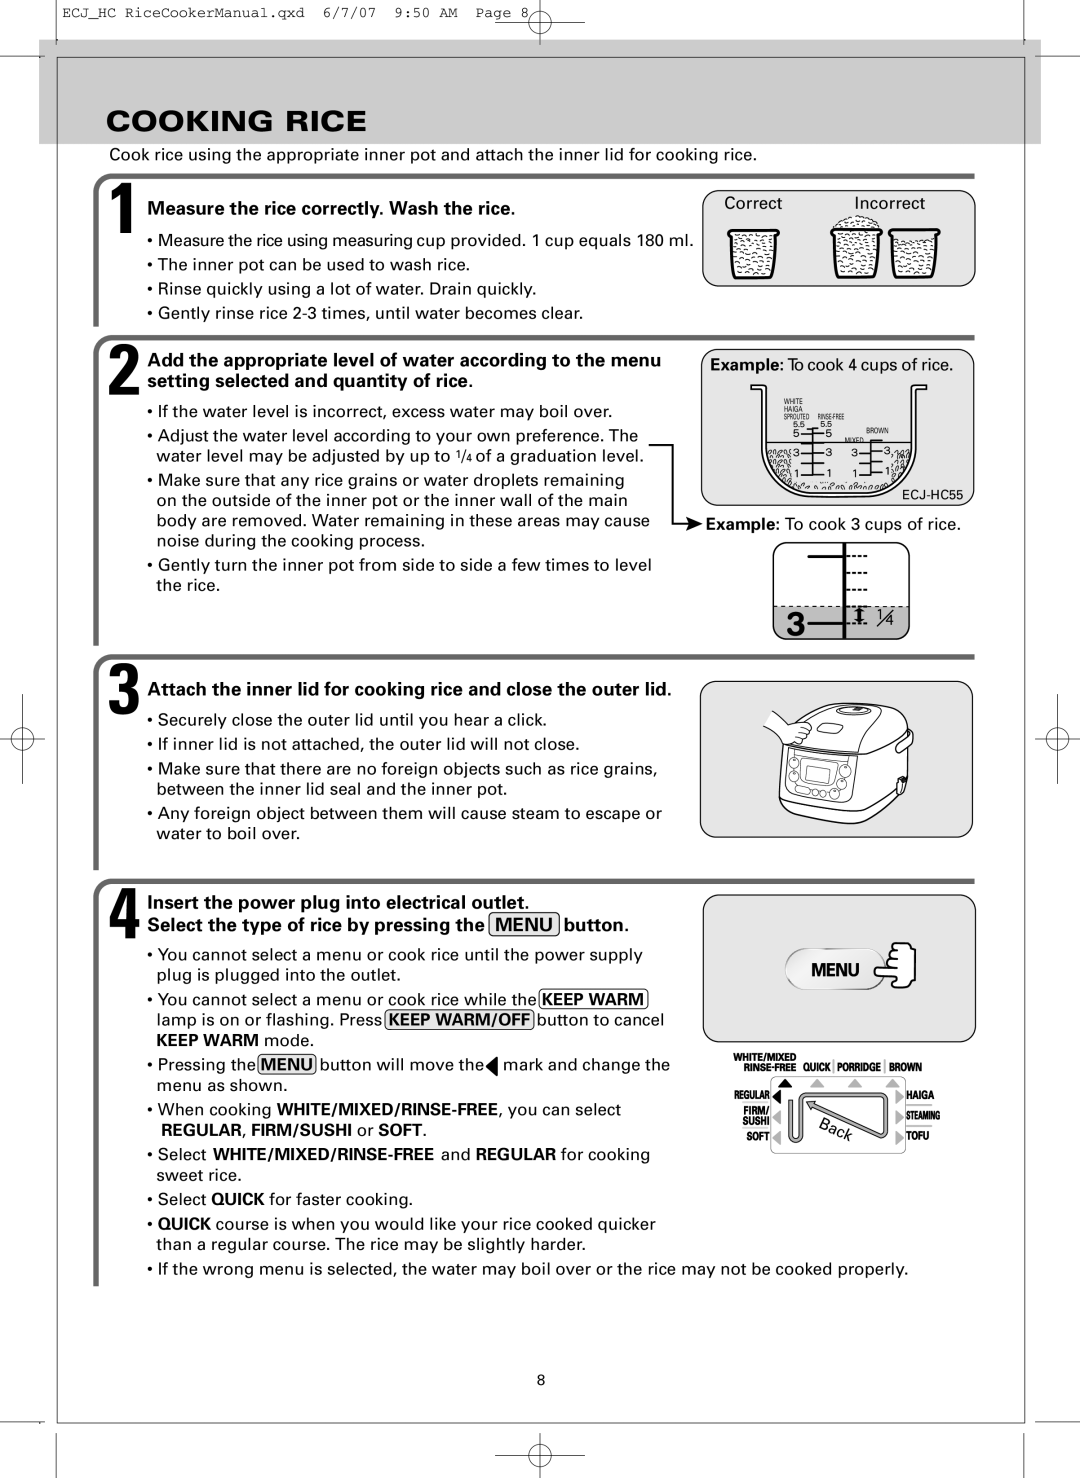 Sanyo ECJ-HC55H Cooking Rice, Measure the rice correctly. Wash the rice, Insert the power plug into electrical outlet 